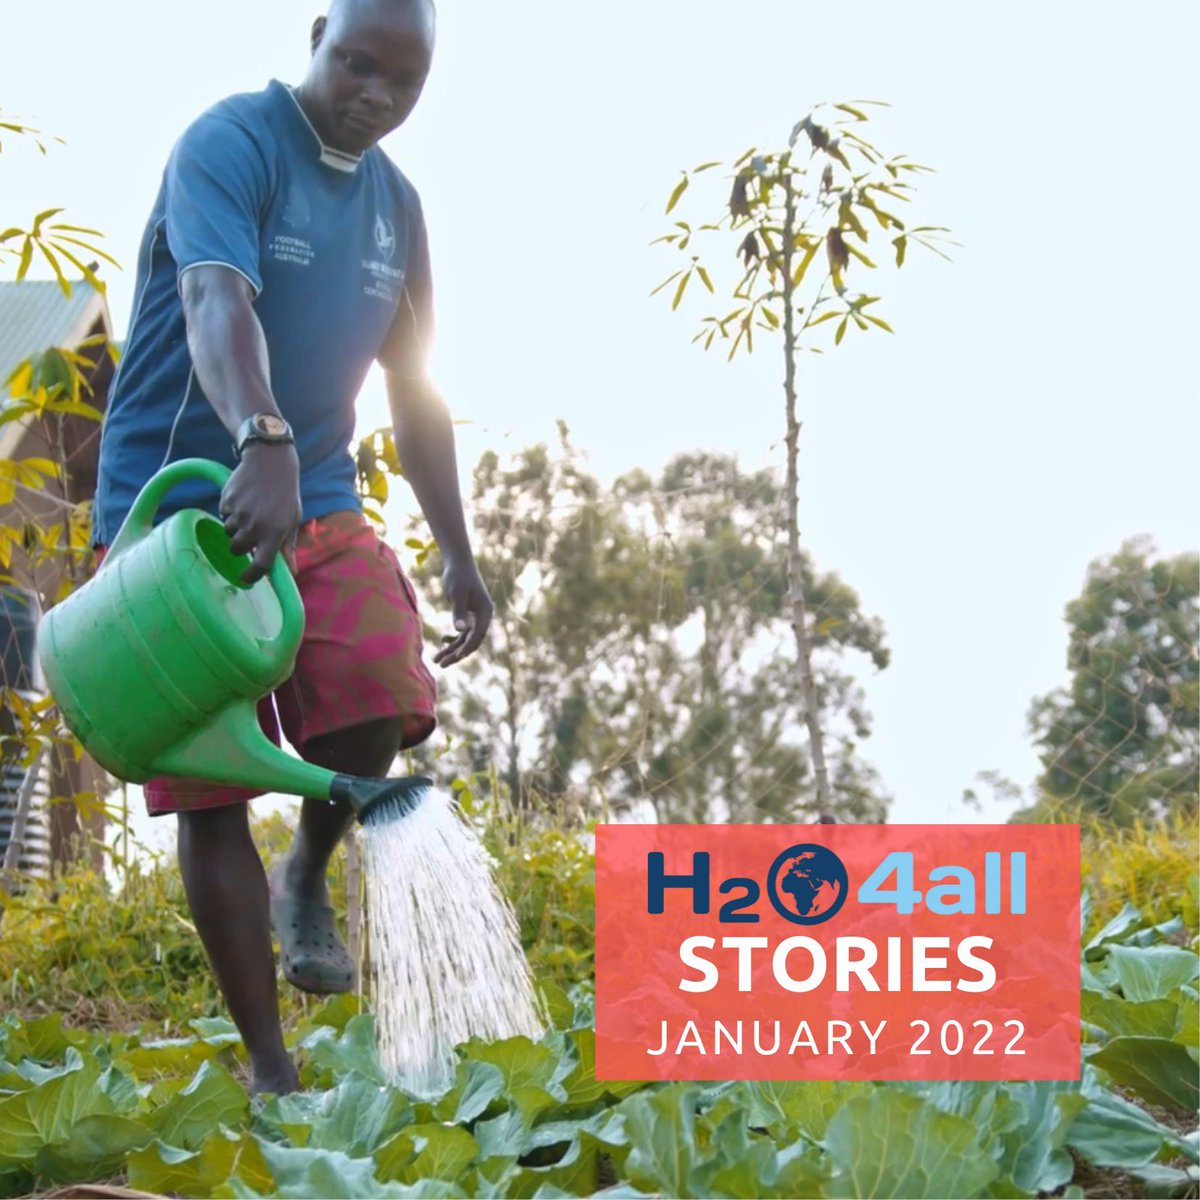 #H2O4ALLStories | Check out our January newsletter here: eepurl.com/hSTjVX.

#safewater #safewaterforall #water #newsletter